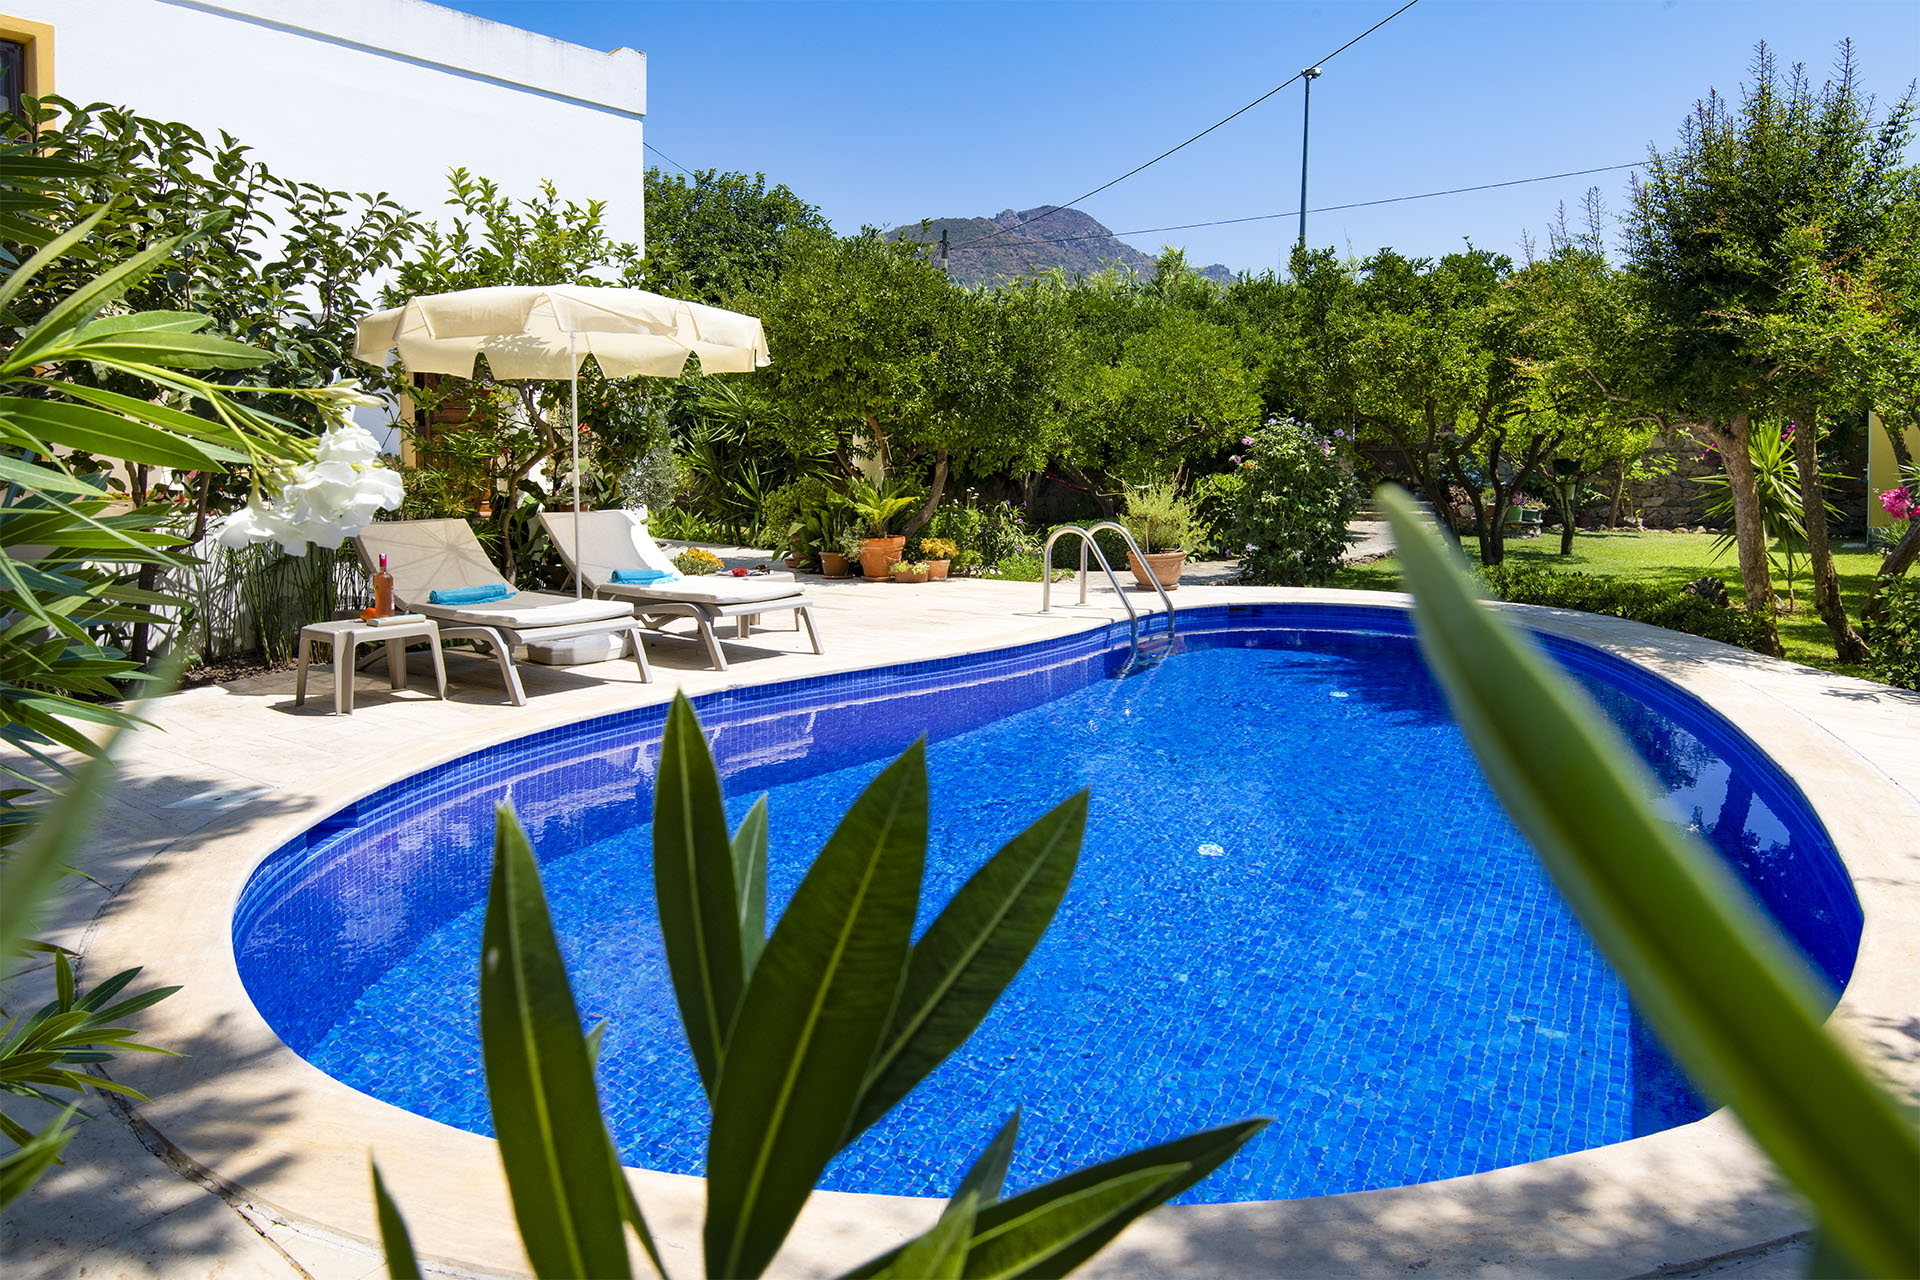 Private garden, private pool holiday villa, secluded and peaceful